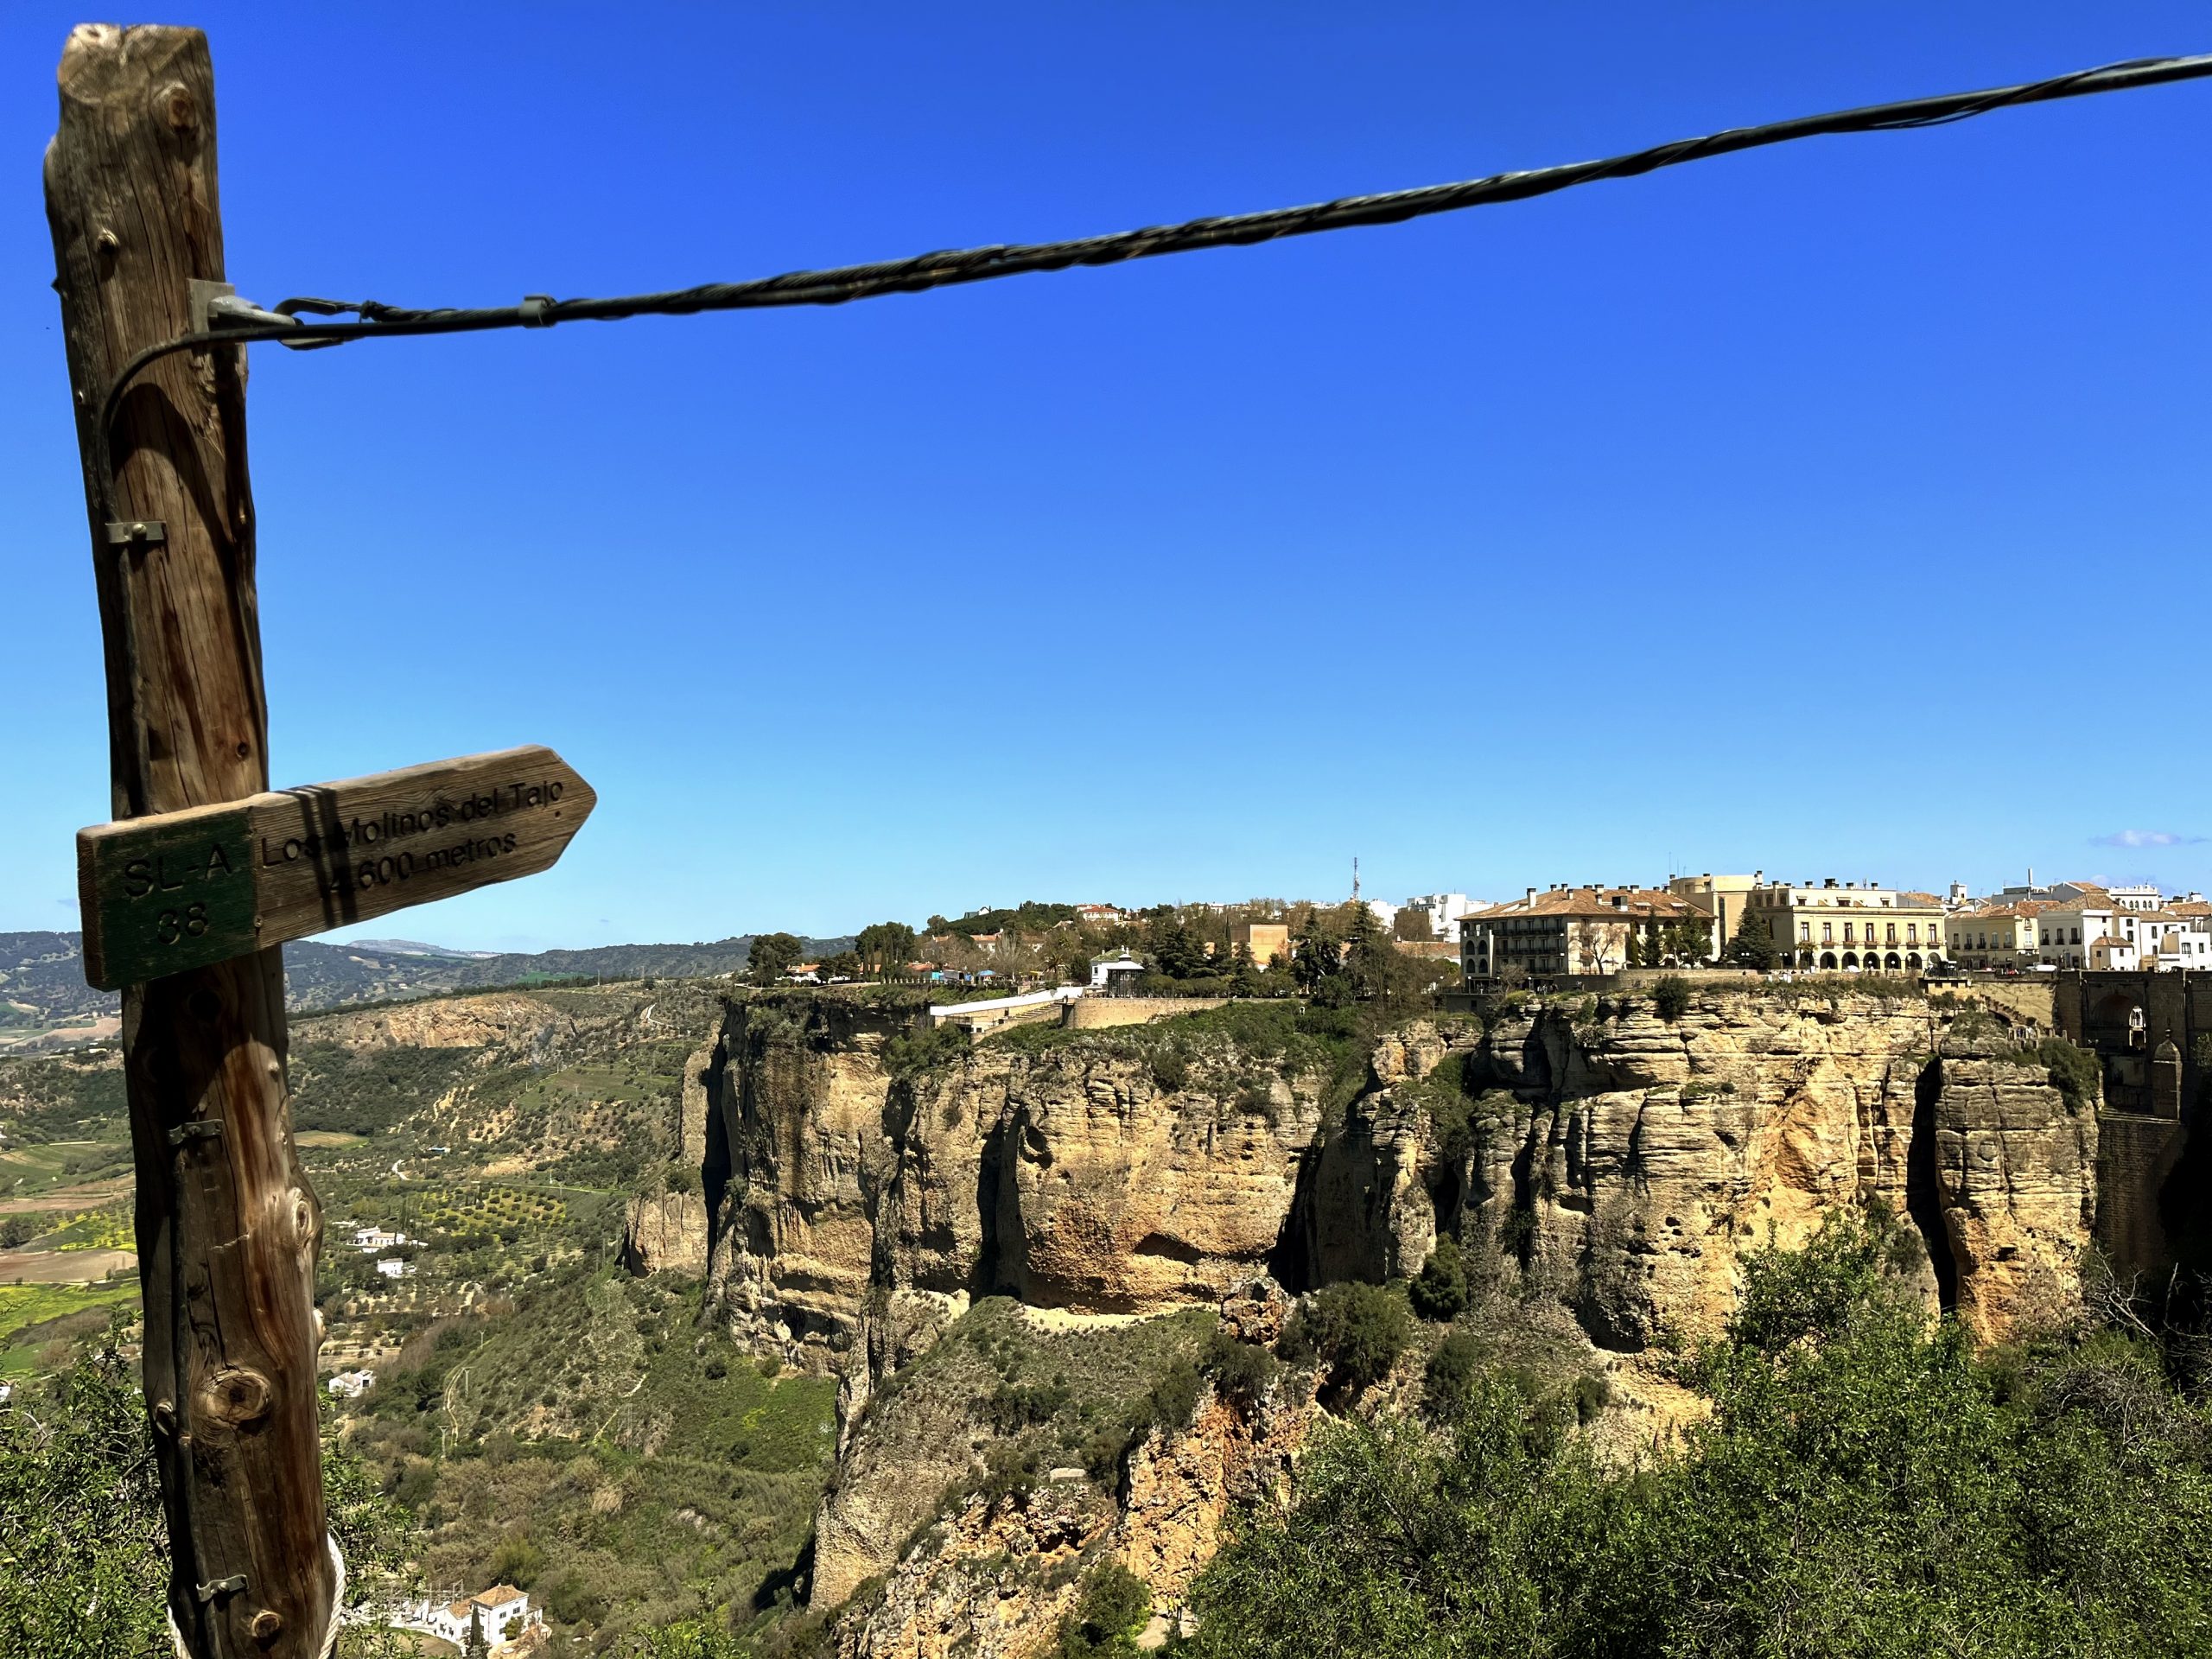 A view of one side of Ronda from the other